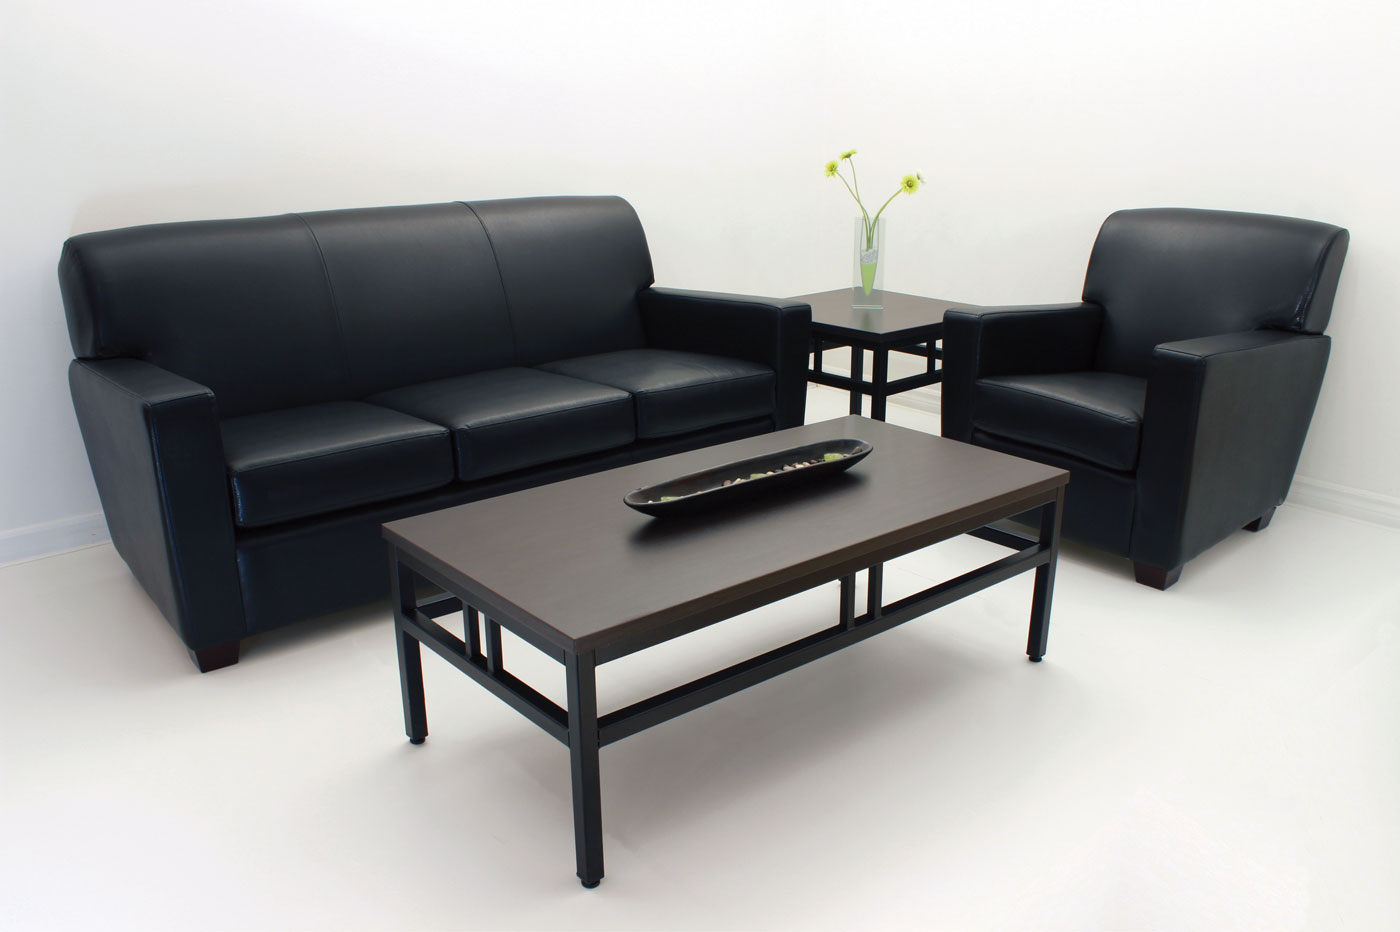 Community Living - Lounge Chairs and Tables